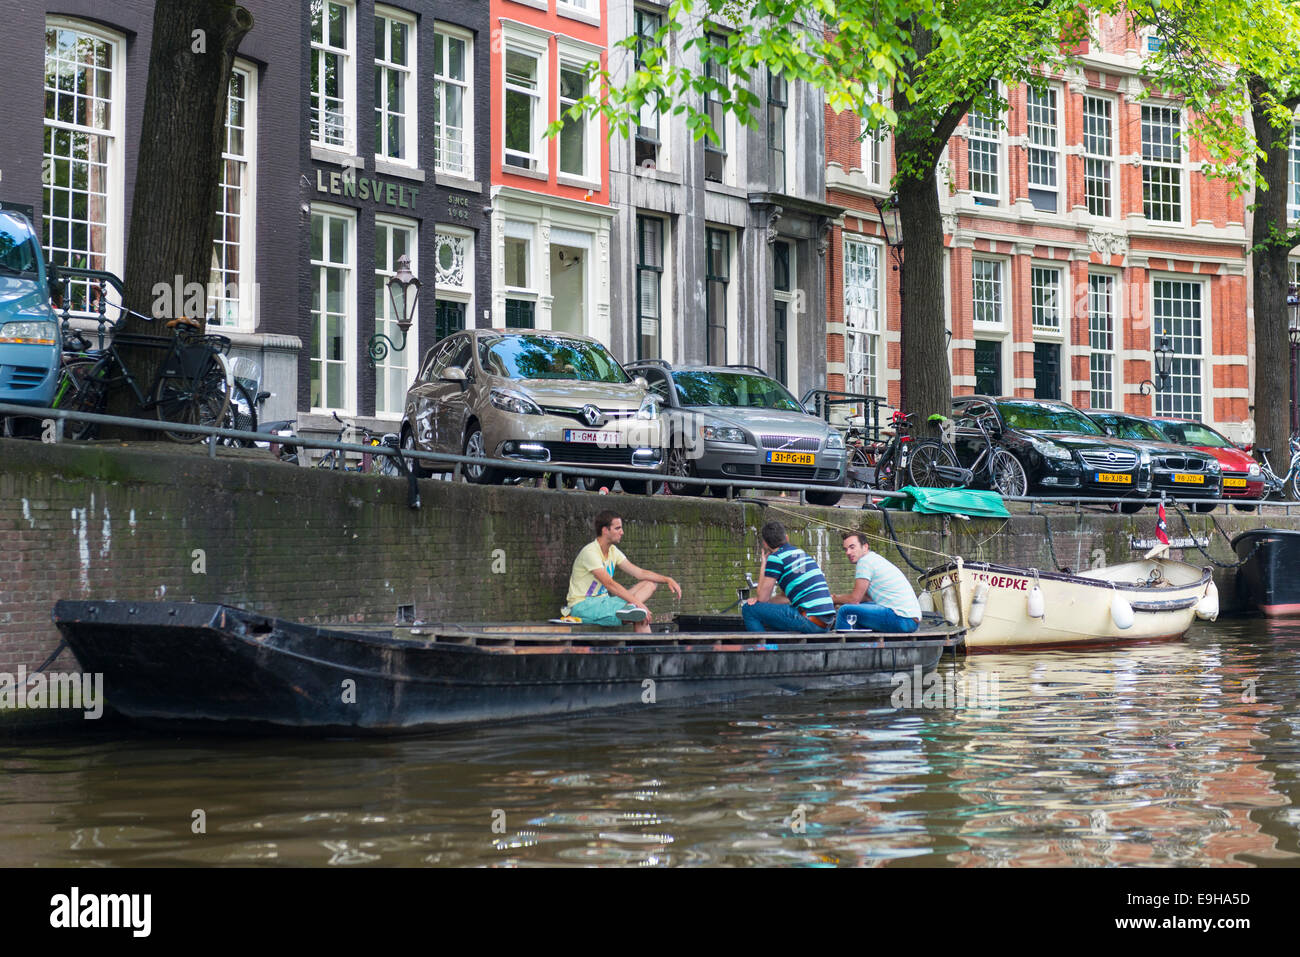 Three young men sitting on boat chatting on a canal in Amsterdam, Netherlands Stock Photo